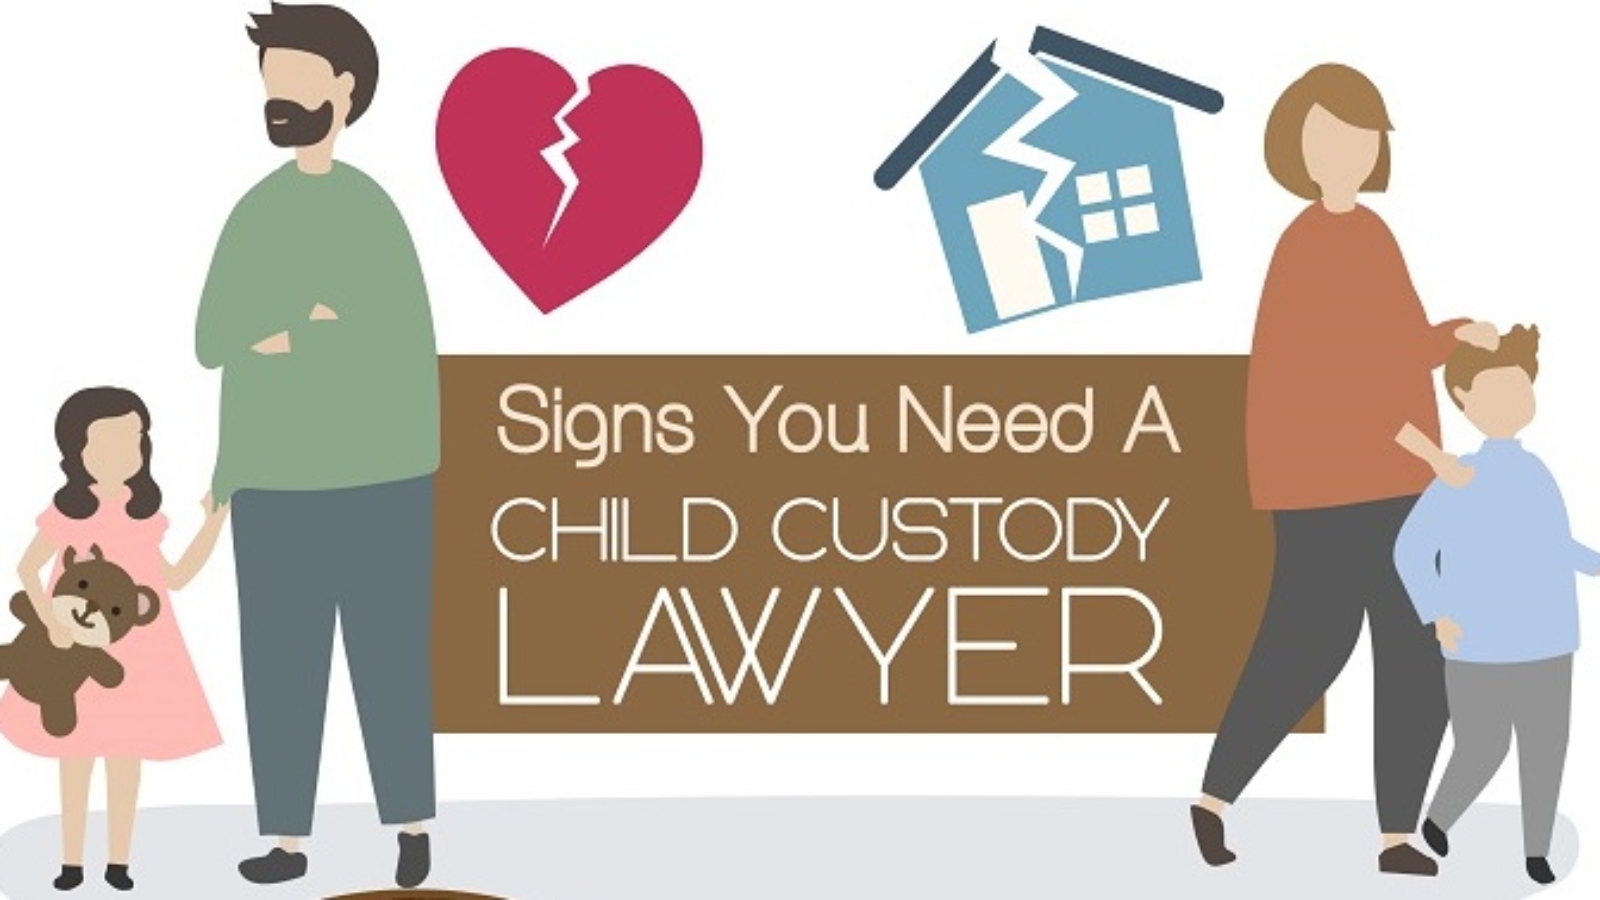 Signs You Need A Child Custody Lawyer